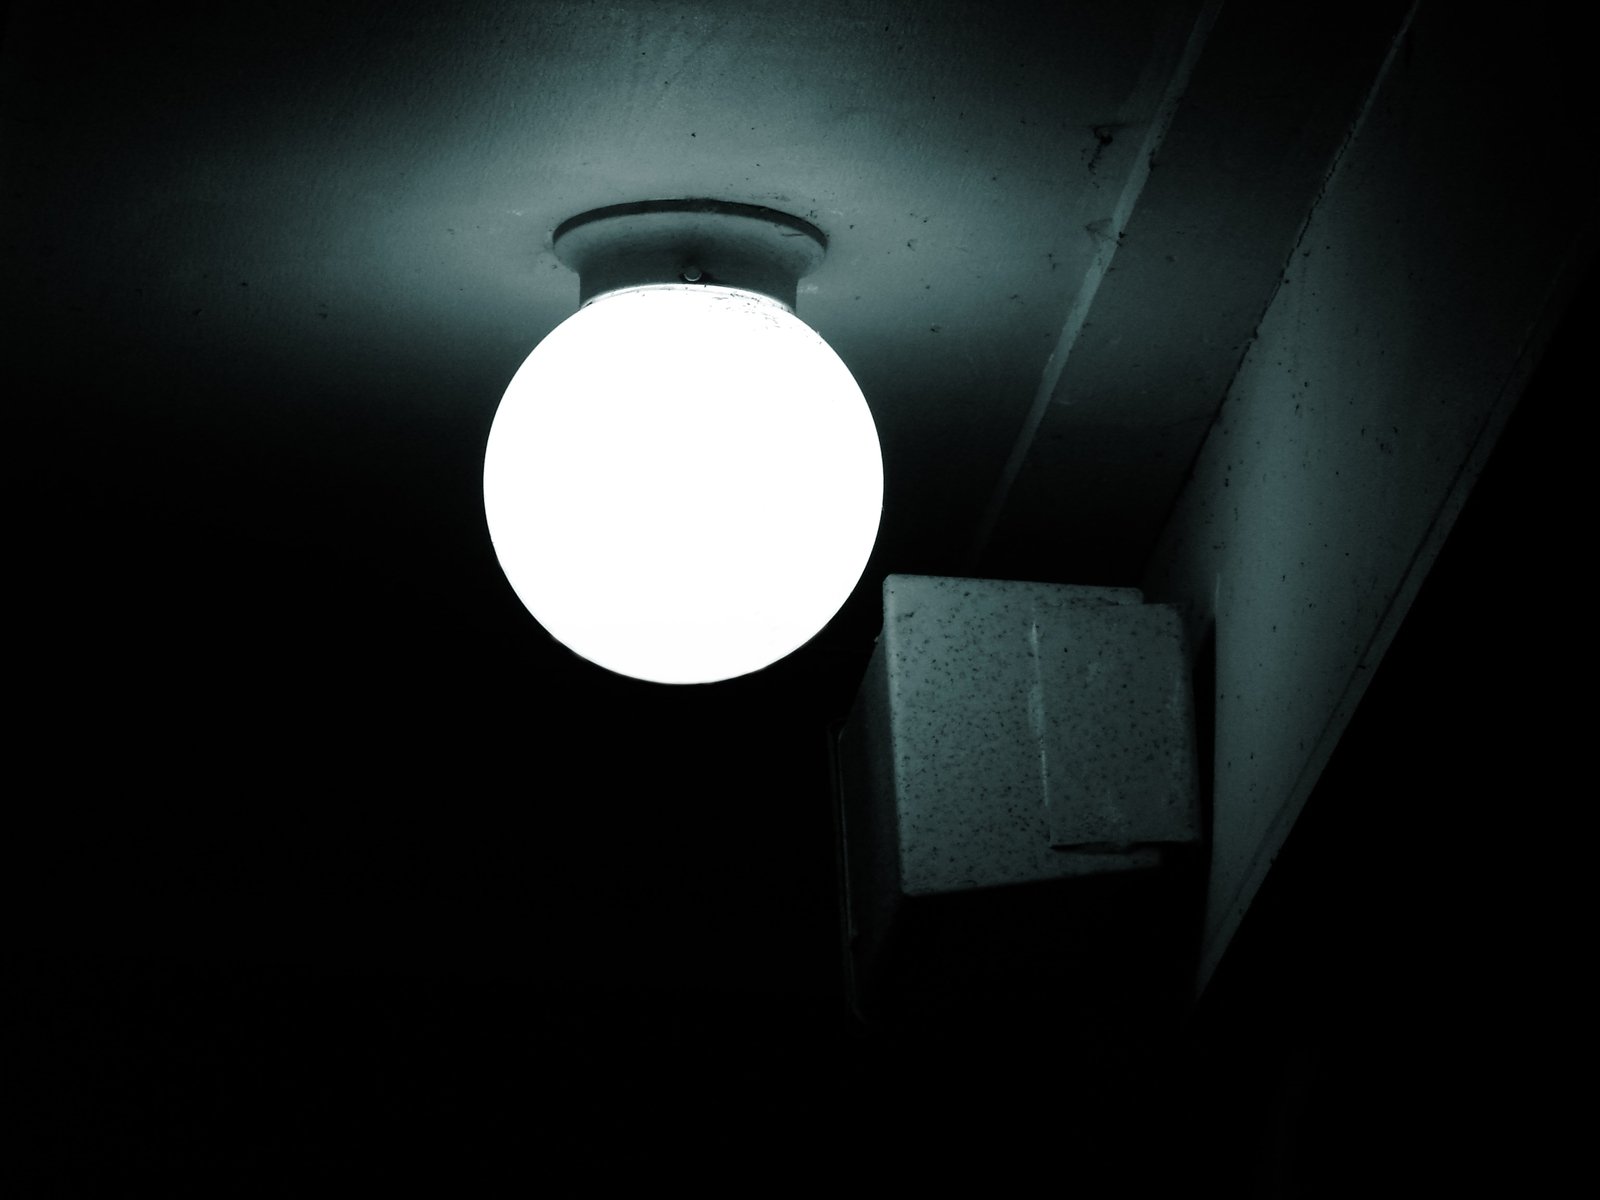 a black - and - white po shows an illuminated orb in the dark